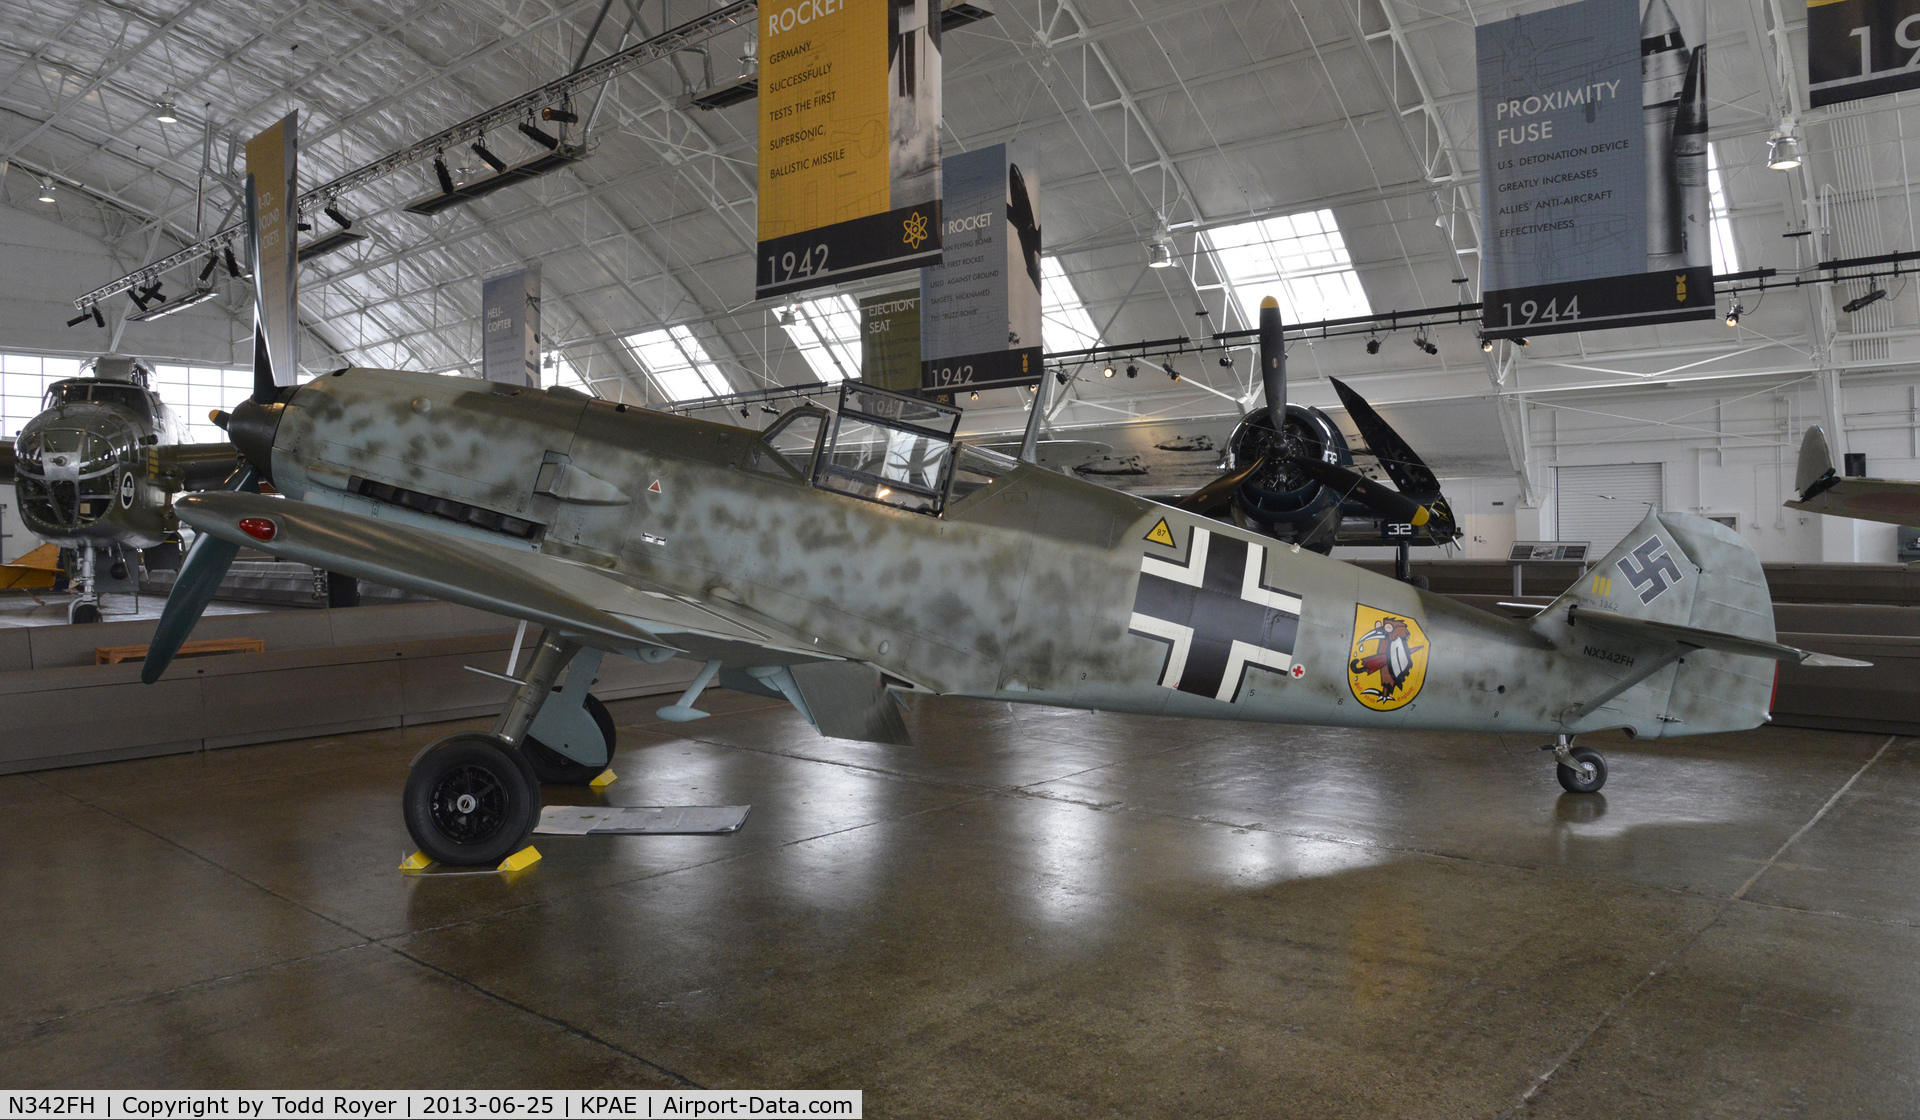 N342FH, 1939 Messerschmitt Bf-109E C/N 1342, Part of the Flying Heritage Collection